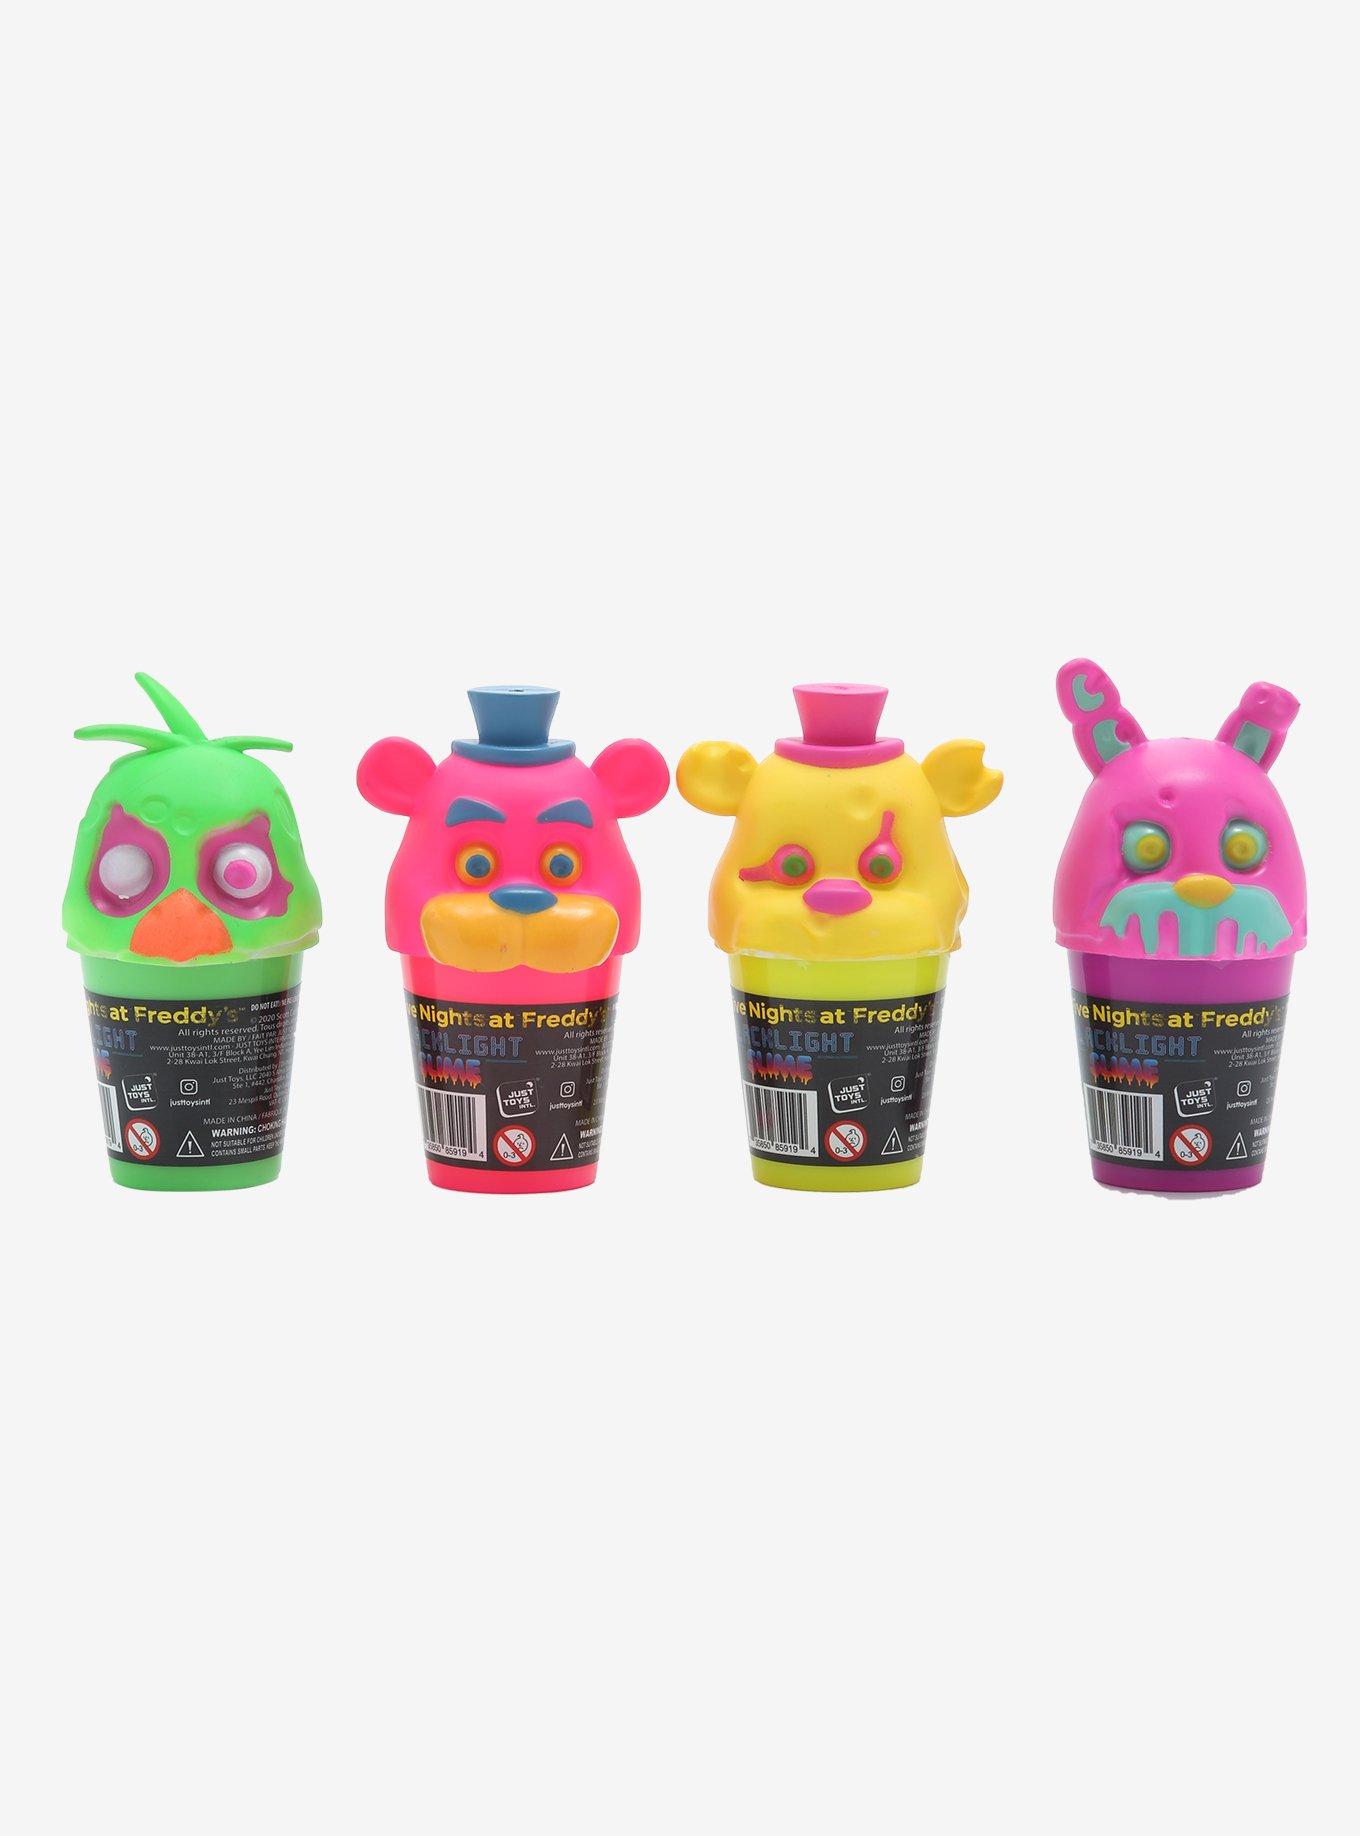 Review: Five Nights at Freddy's - Enemy Slime